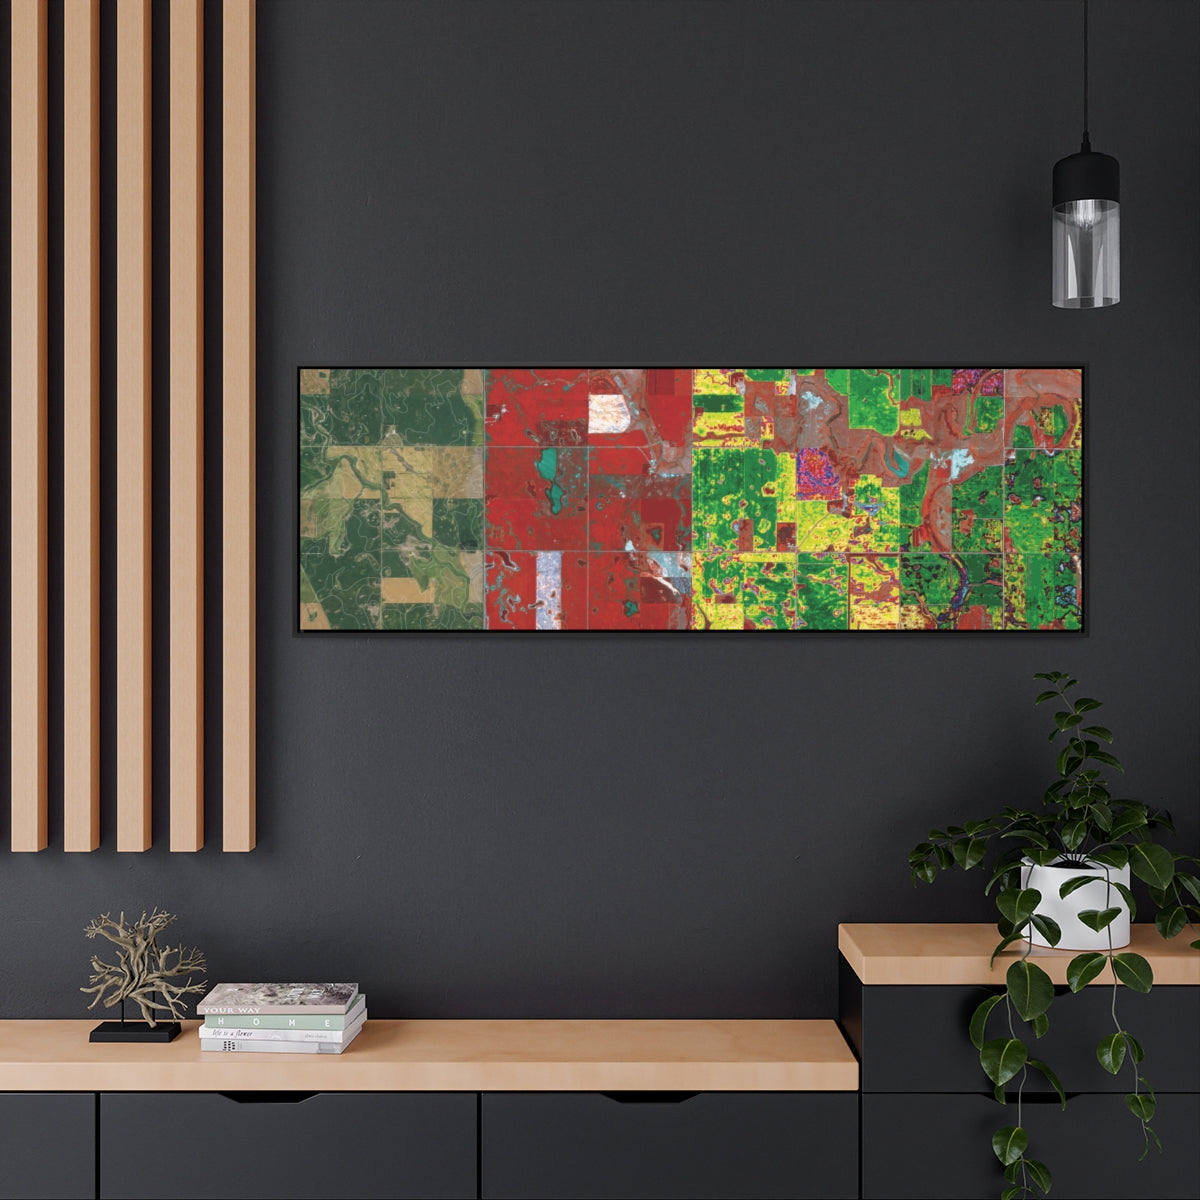 Guggenheim Satellite Imagery Framed Canvas Art from Countryside/The Future Exhibition